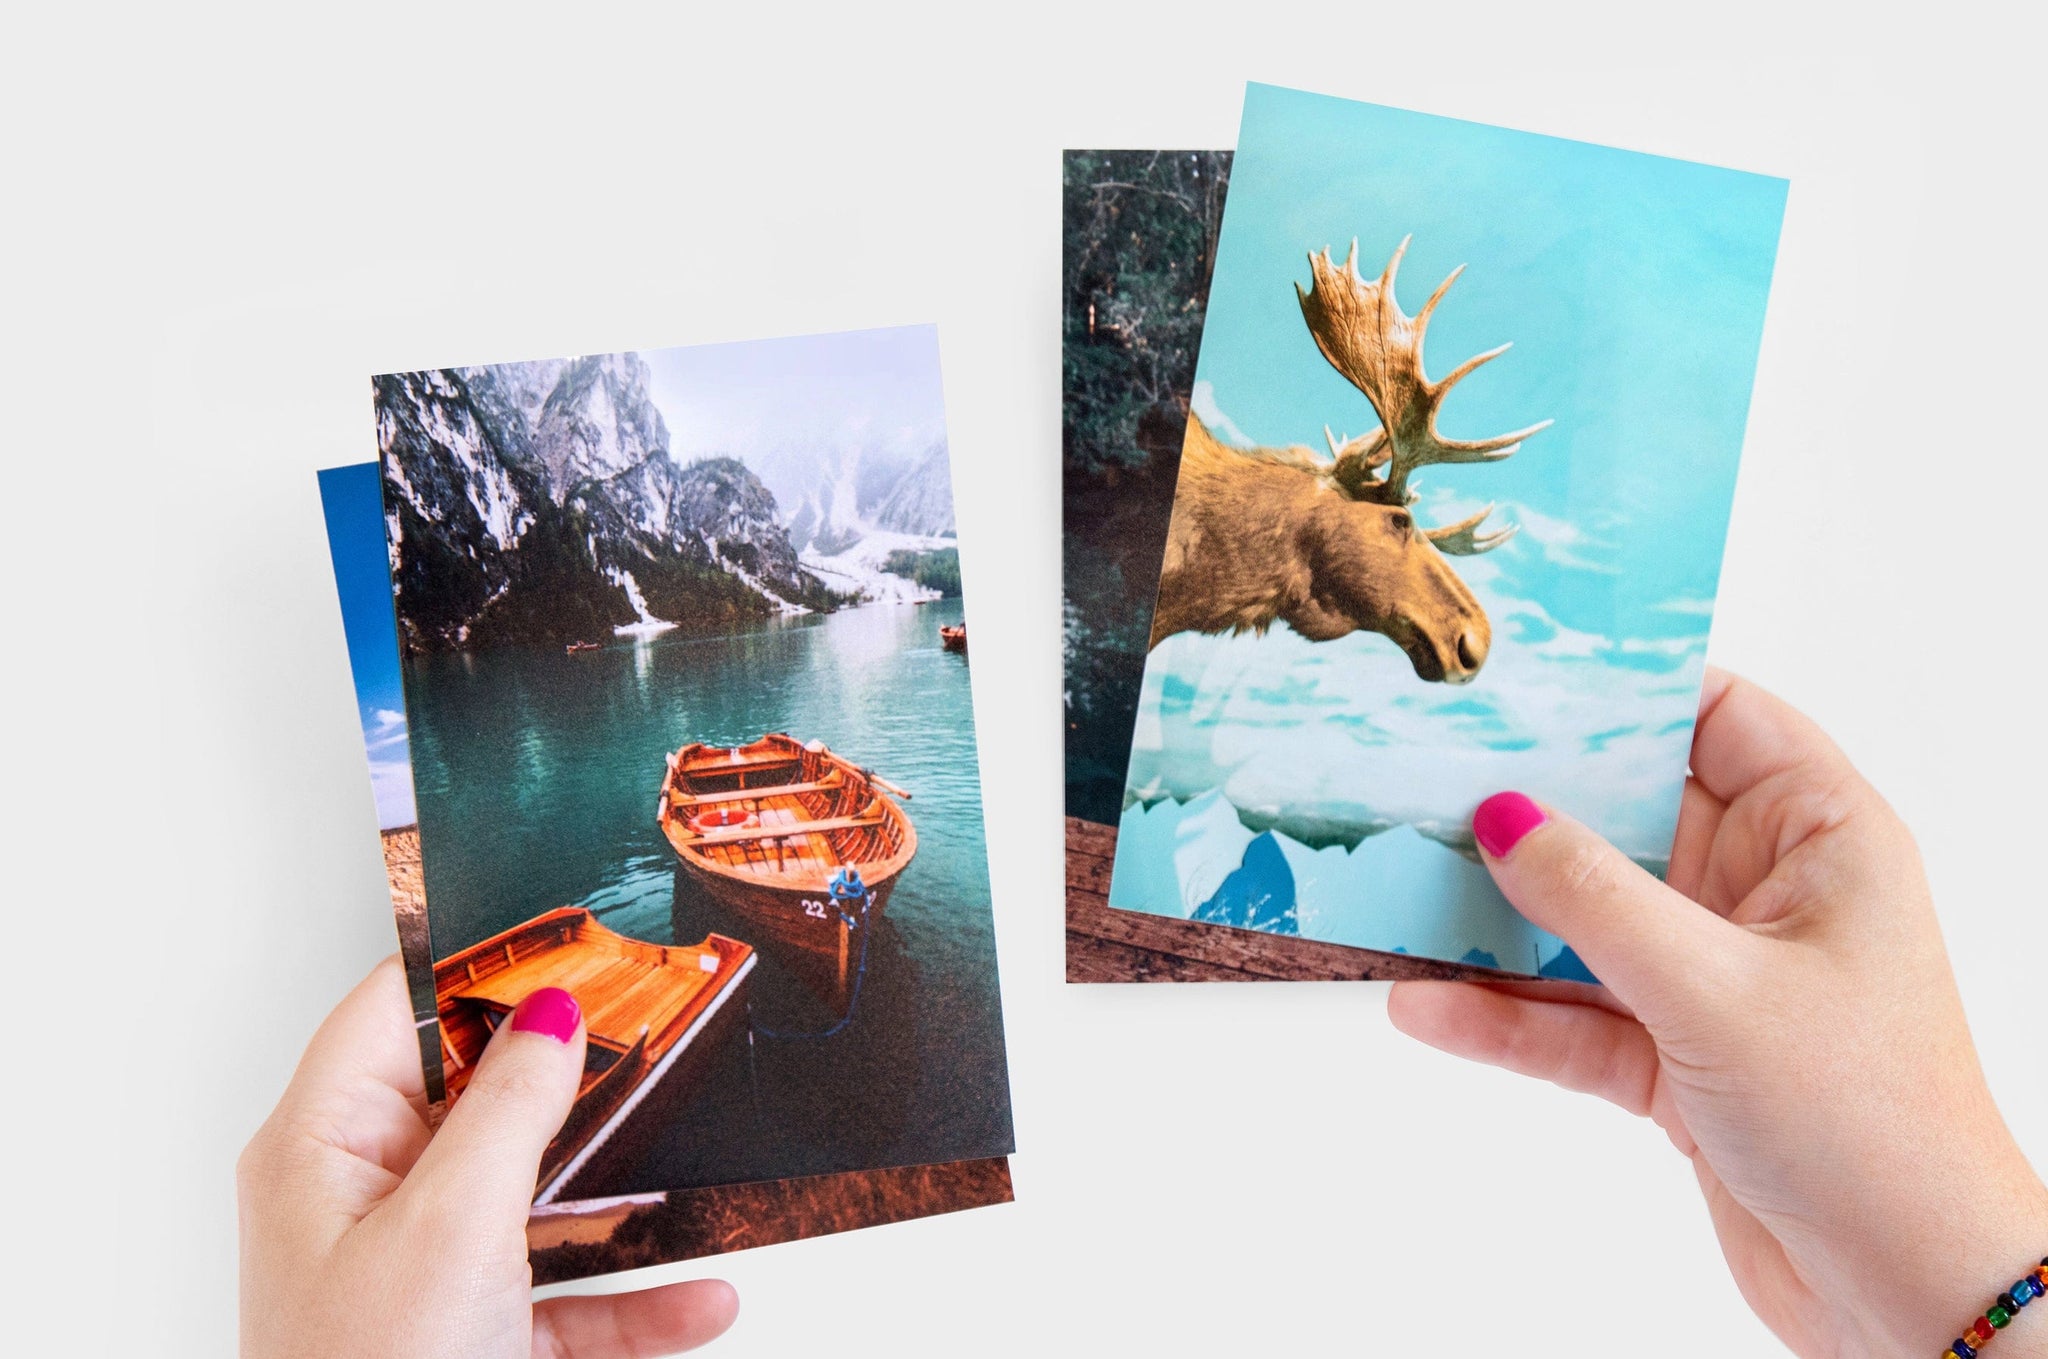 Woman's hands holding up several 4x6" Photo Prints, the top prints feature photos of a boat and a moose.